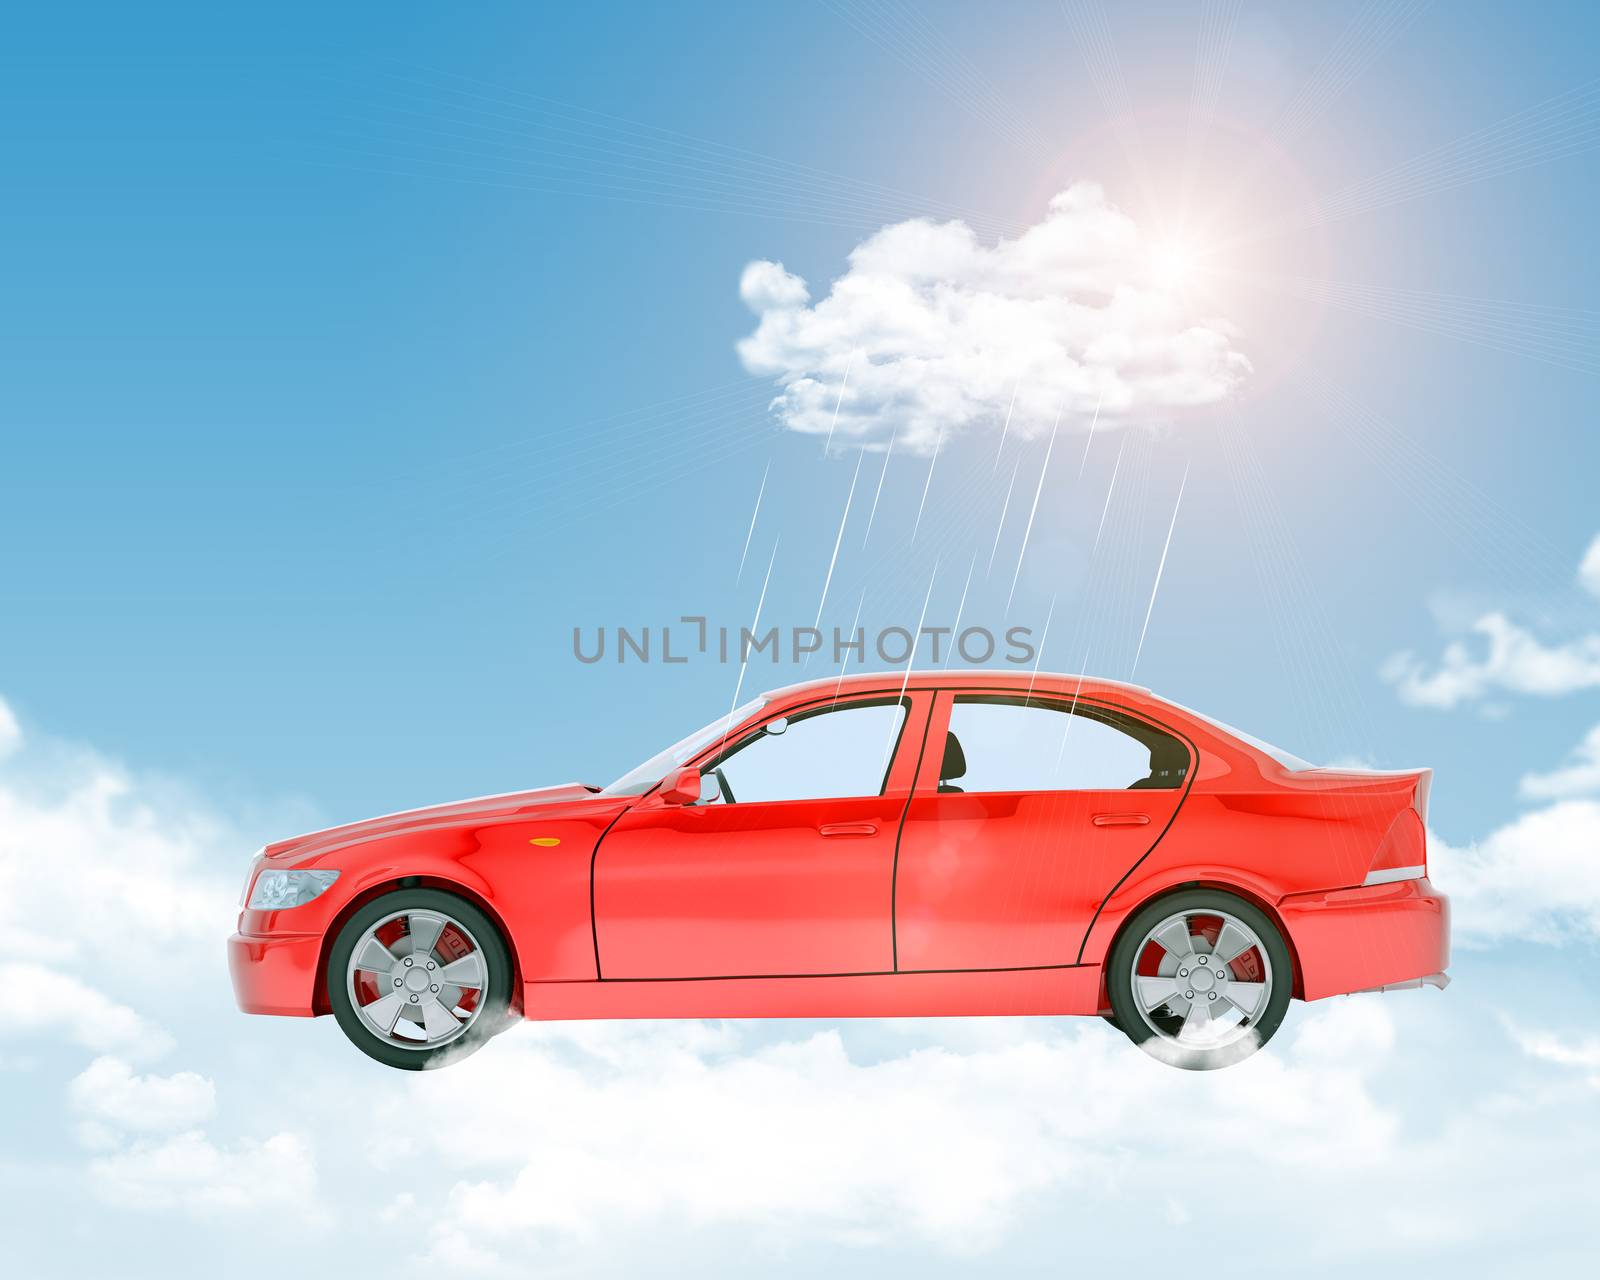 Blue sky with clouds and red car by cherezoff